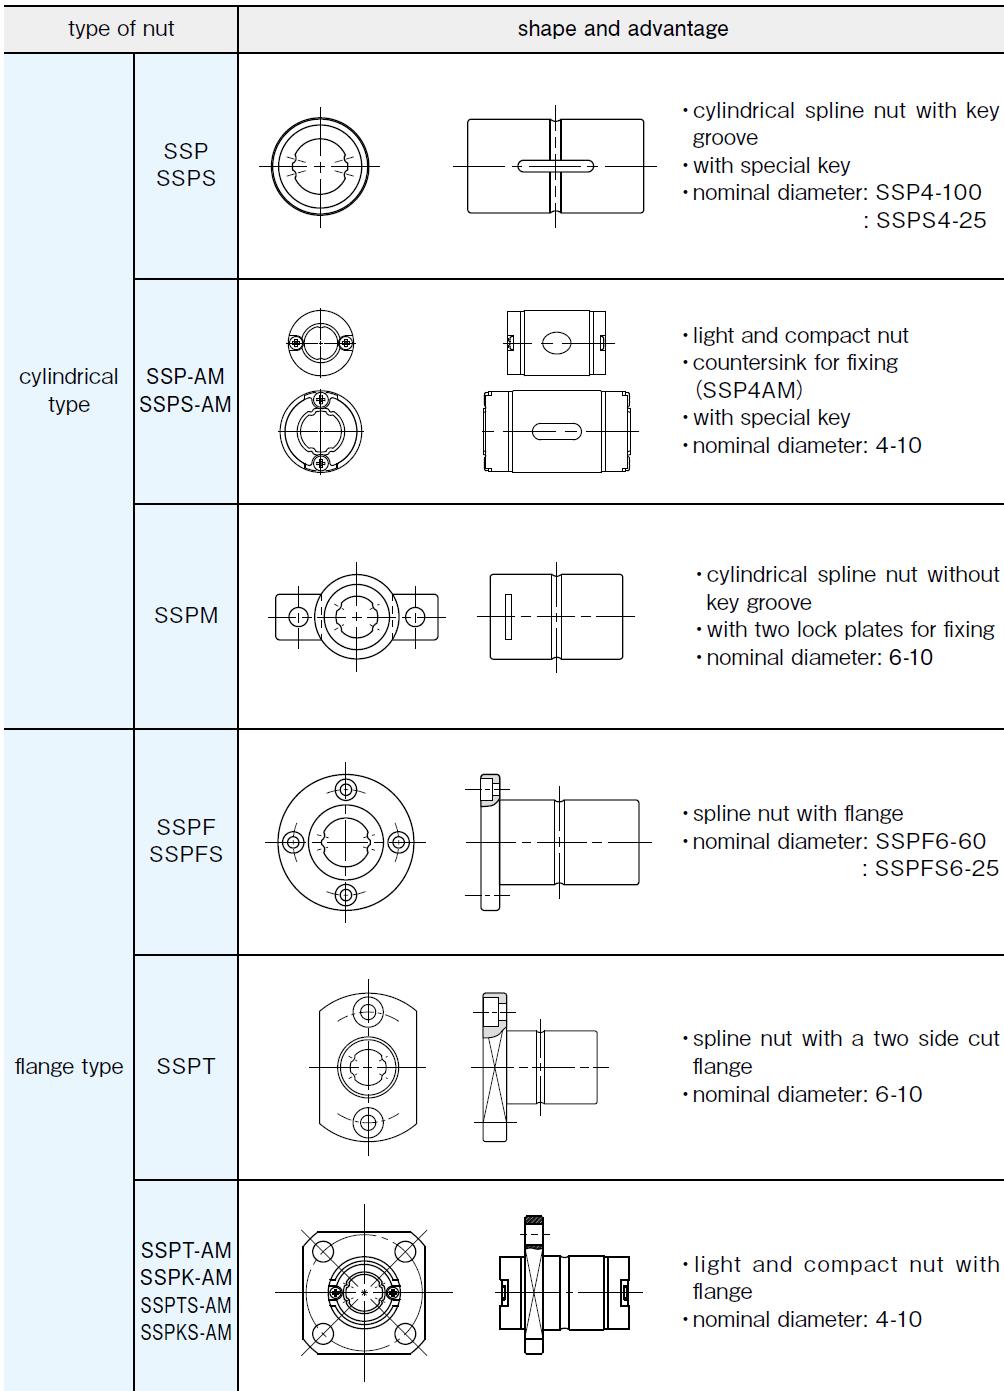 A wide variety of spline designs are available and all spline nuts come with side-seals as a standard feature. This chart shows the shape and advantage of cylindrical and flange type spline nuts.